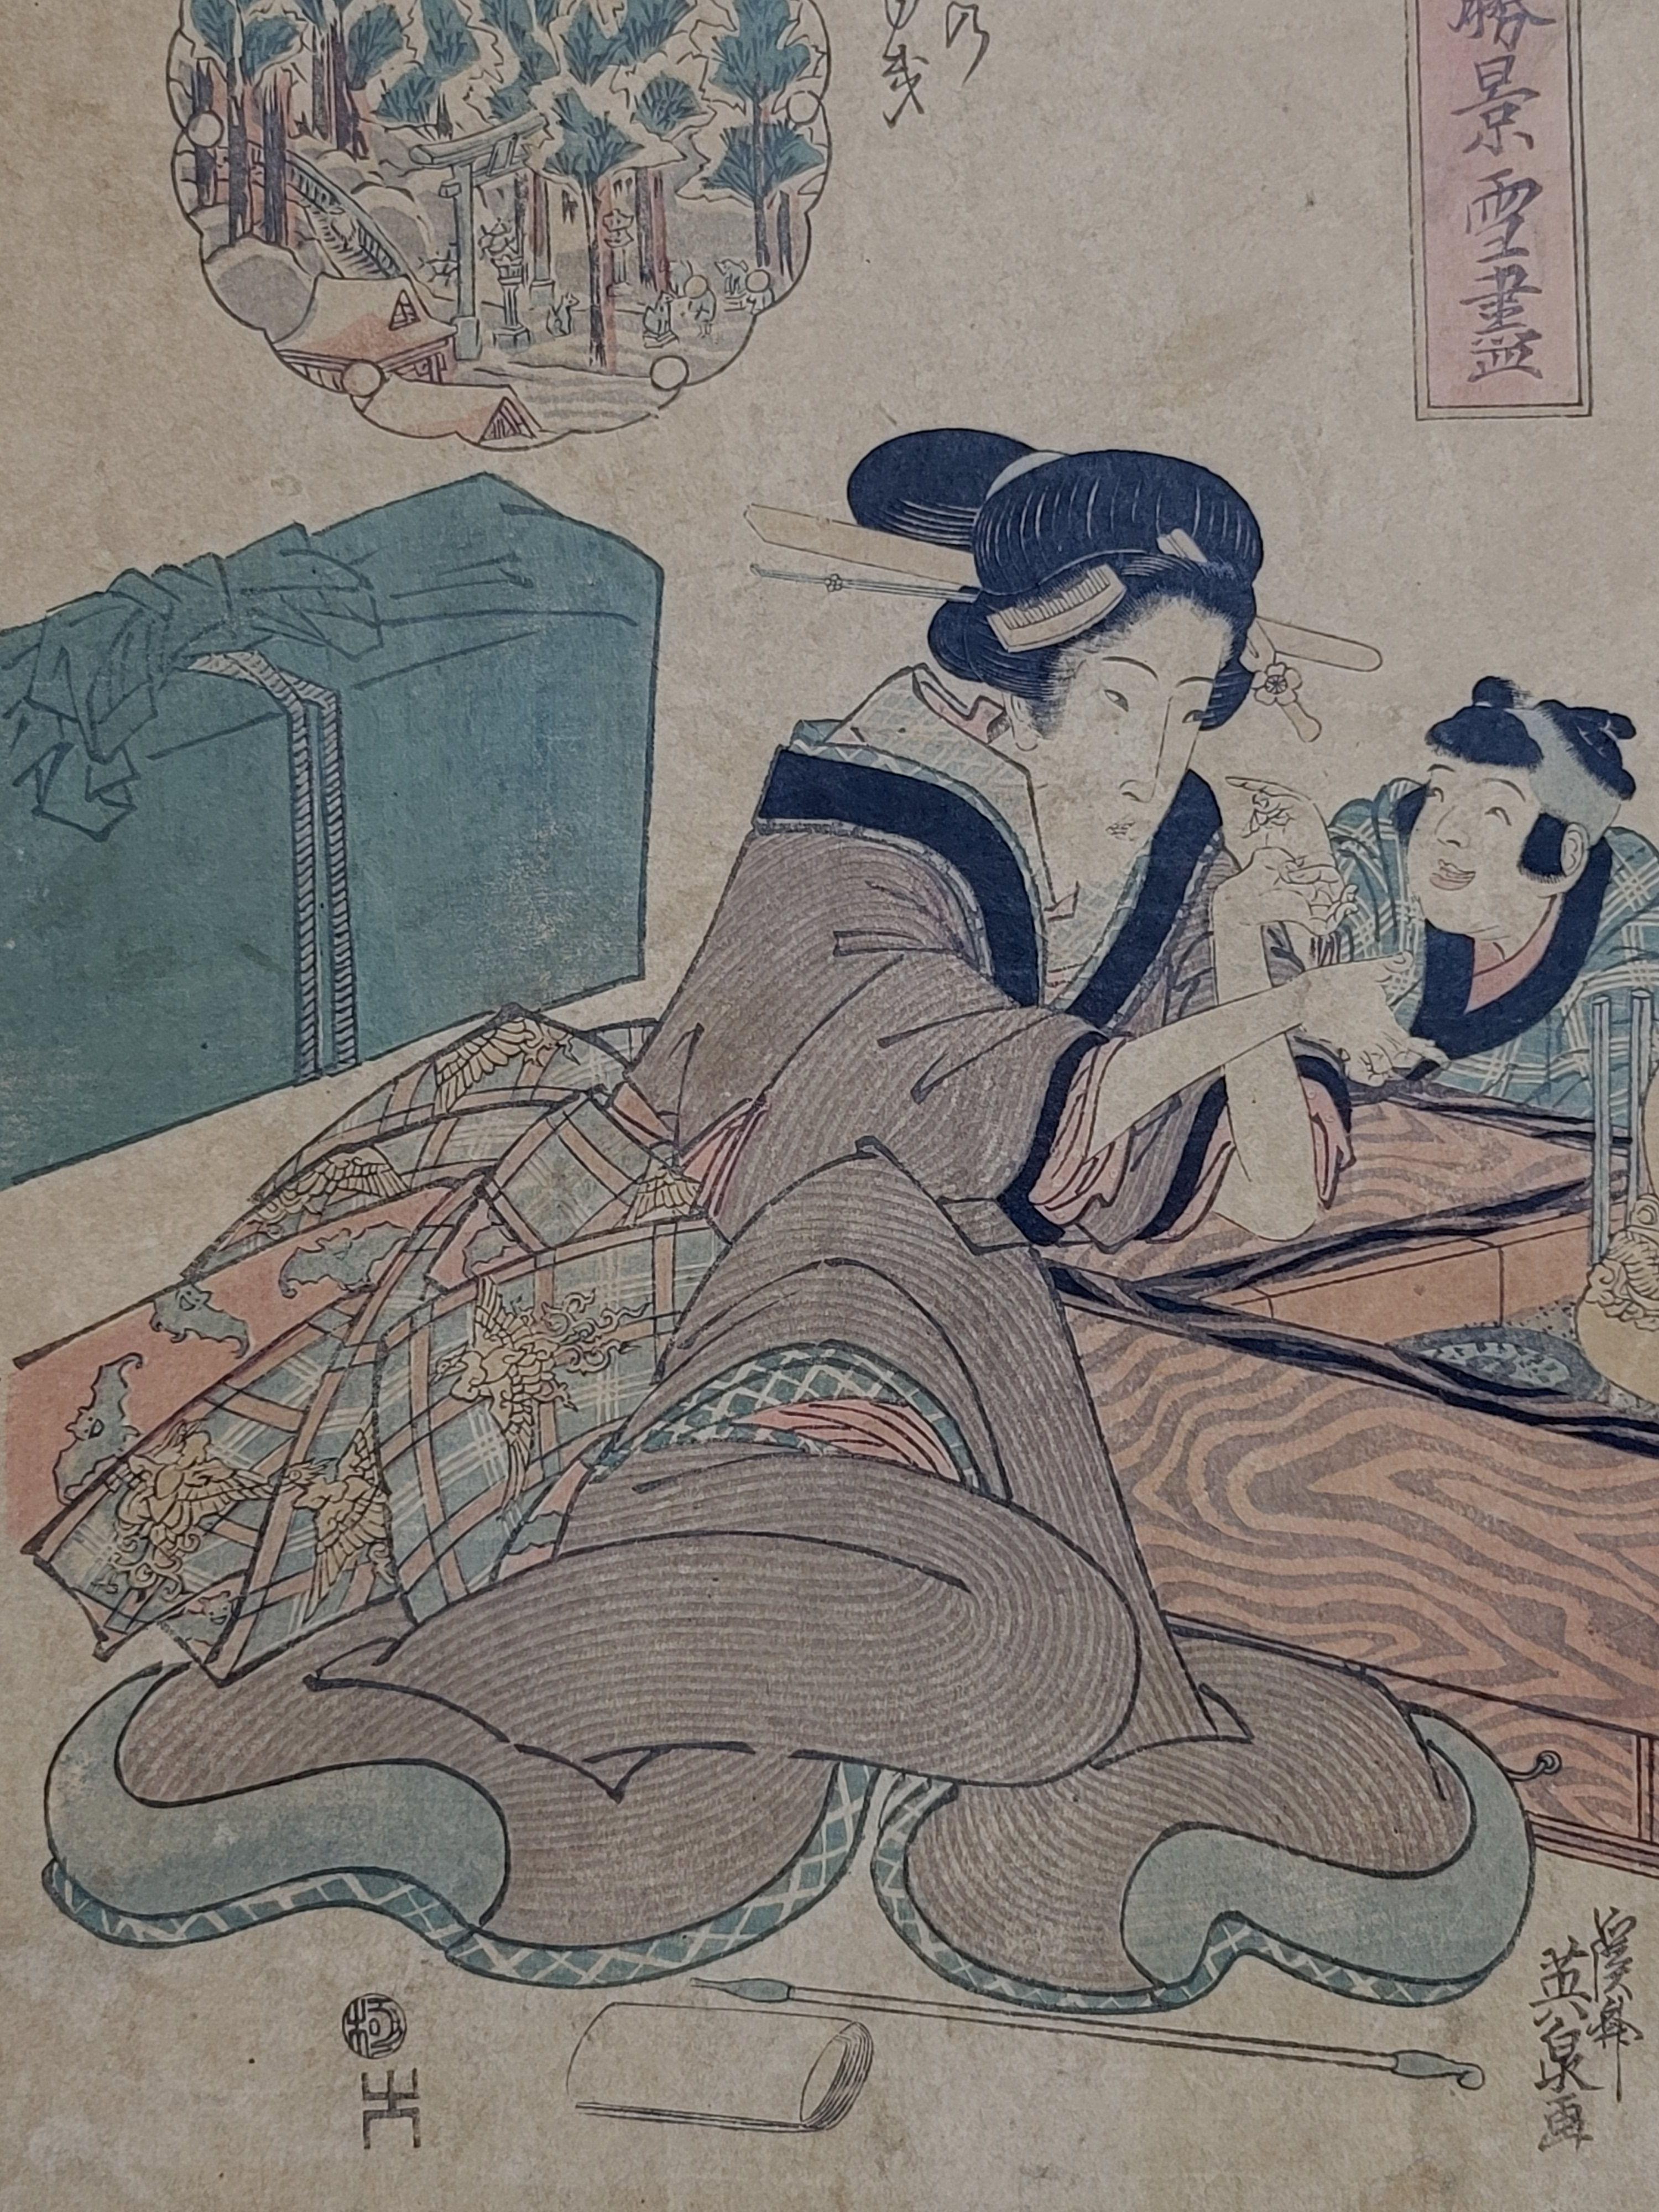 Japanese Woodblock Print by Keisai Eisen ?? ?? (1790~1848), original and unframed.

ABOUT THE ARTIST

Keisai Eisen (?? ??, 1790–1848) was a Japanese ukiyo-e artist who specialized in bijin-ga (pictures of beautiful women). His best works,